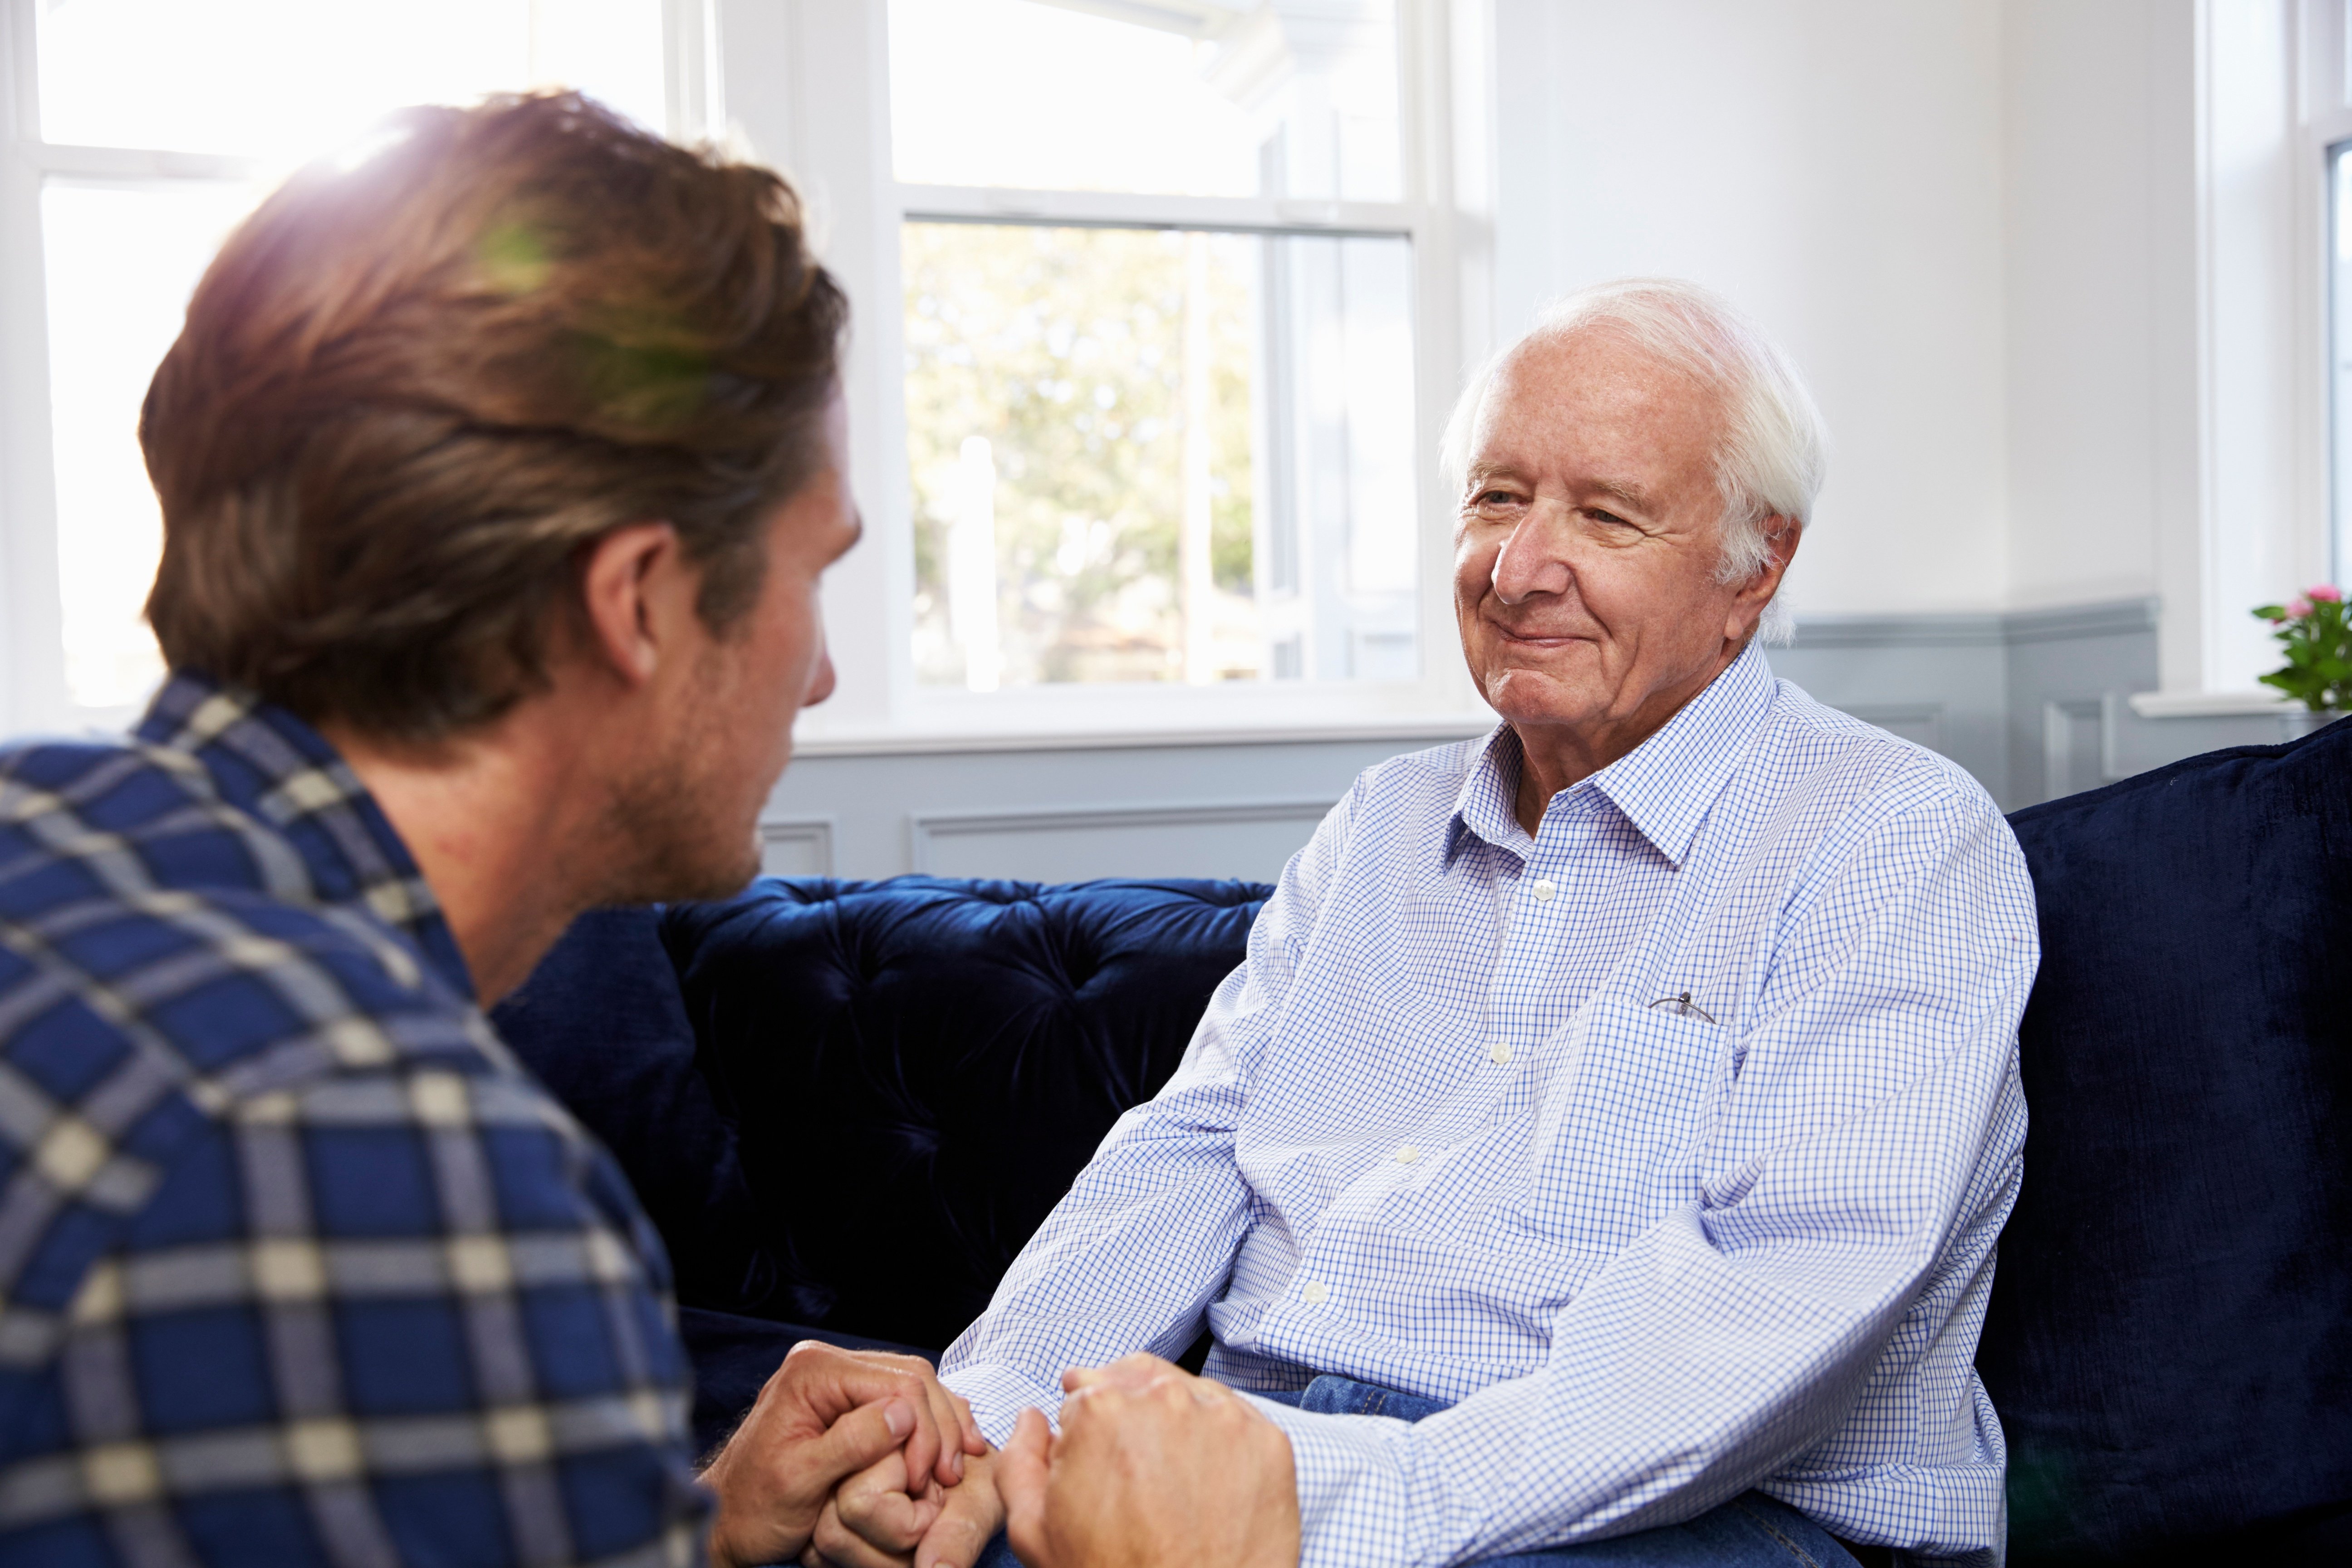 6 Ways to Approach a Resistive Parent About Assisted Living